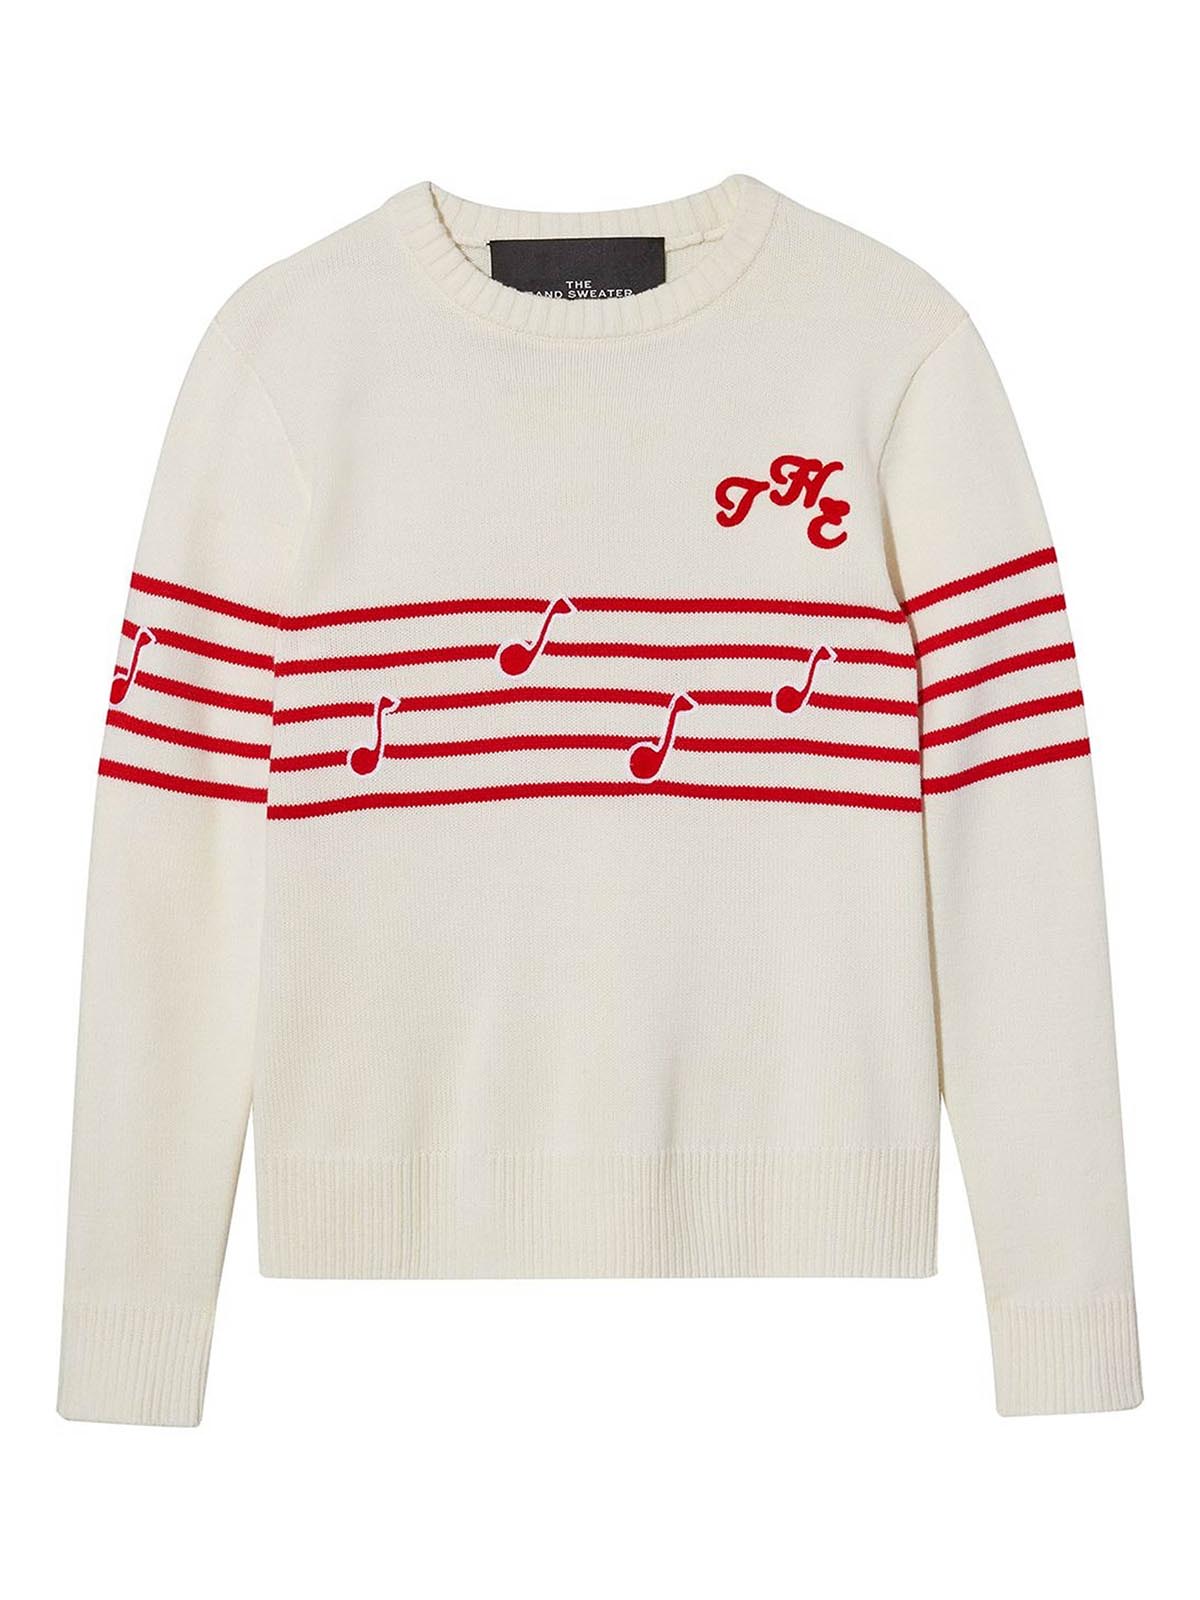 Marc Jacobs, Sweater